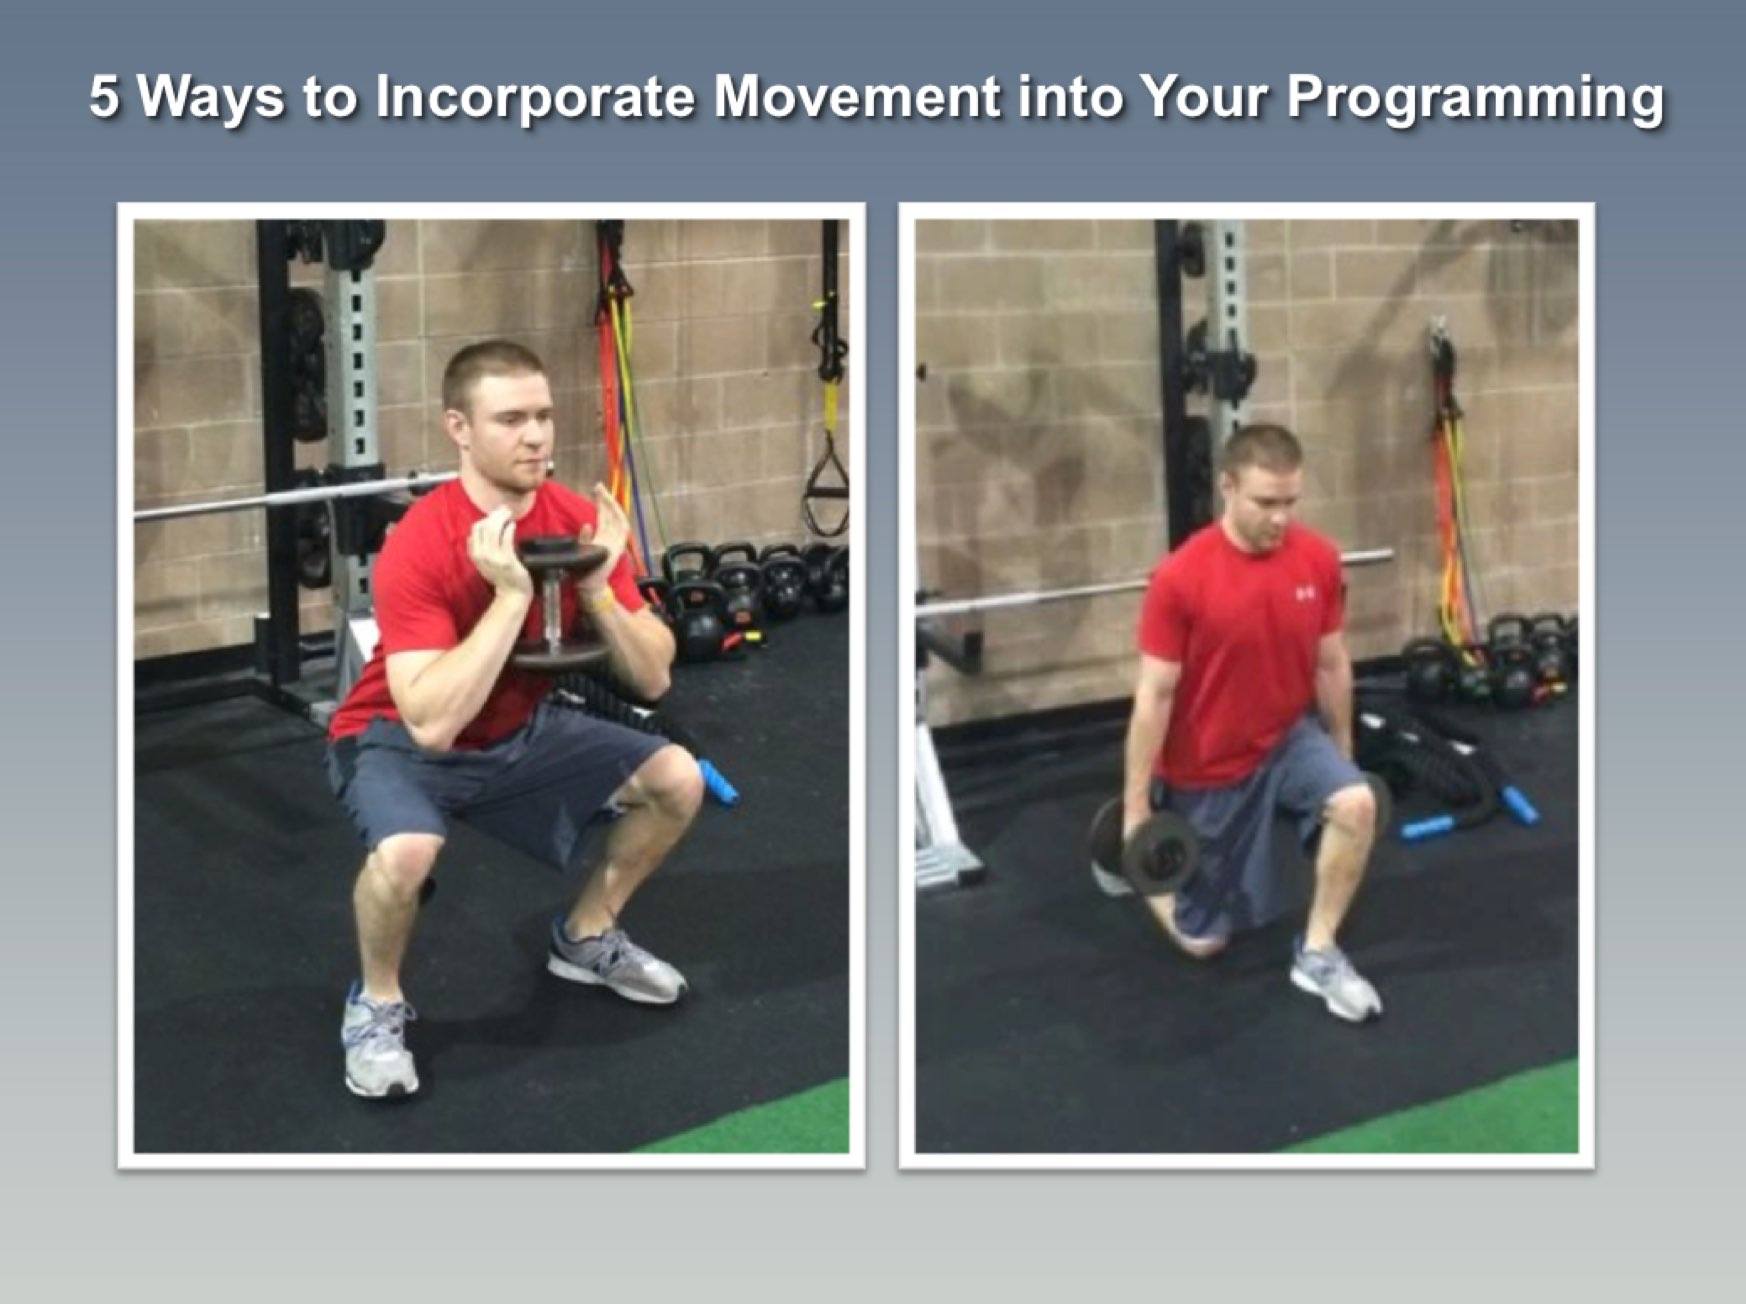 5 Ways to Incorporate Movement into Your Programming